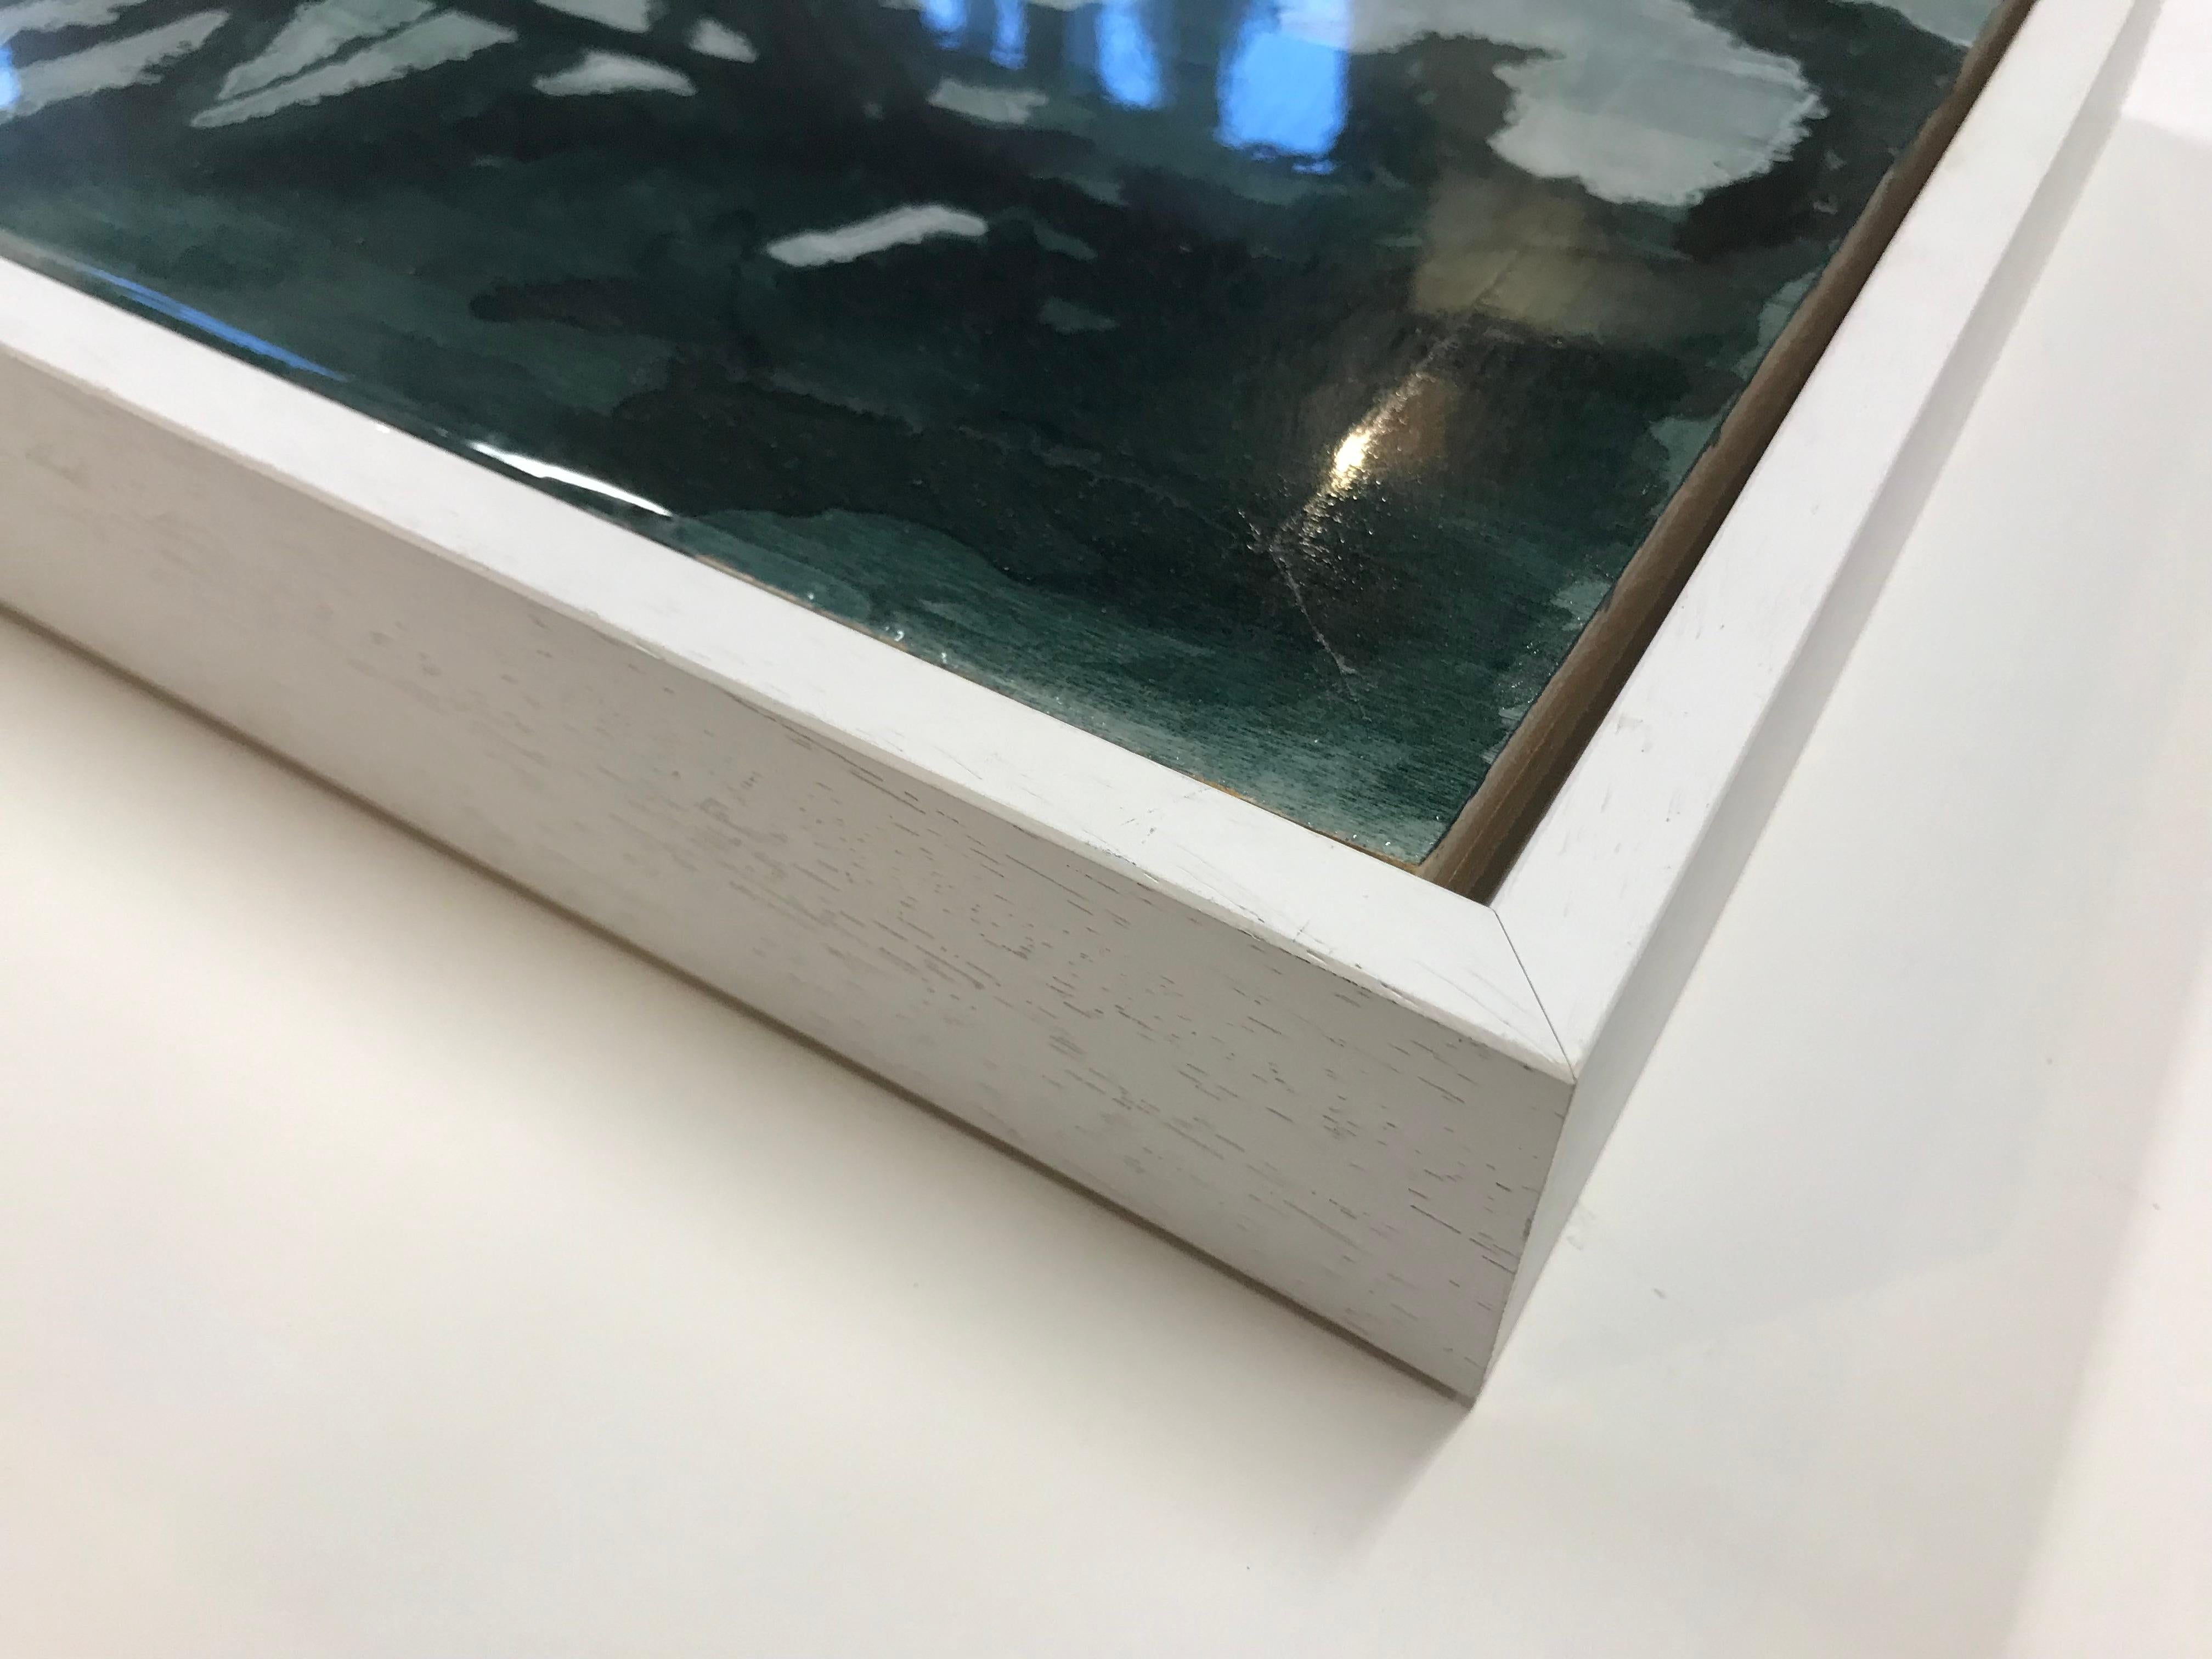 Silver View [2021] by Rebecca Tucker
Original painting
Acrylic on cradled wooden panel
Sold frames, in white box tray frame, as shown in images
Please note that insitu images are purely an indication of how a piece may look

ARTIST